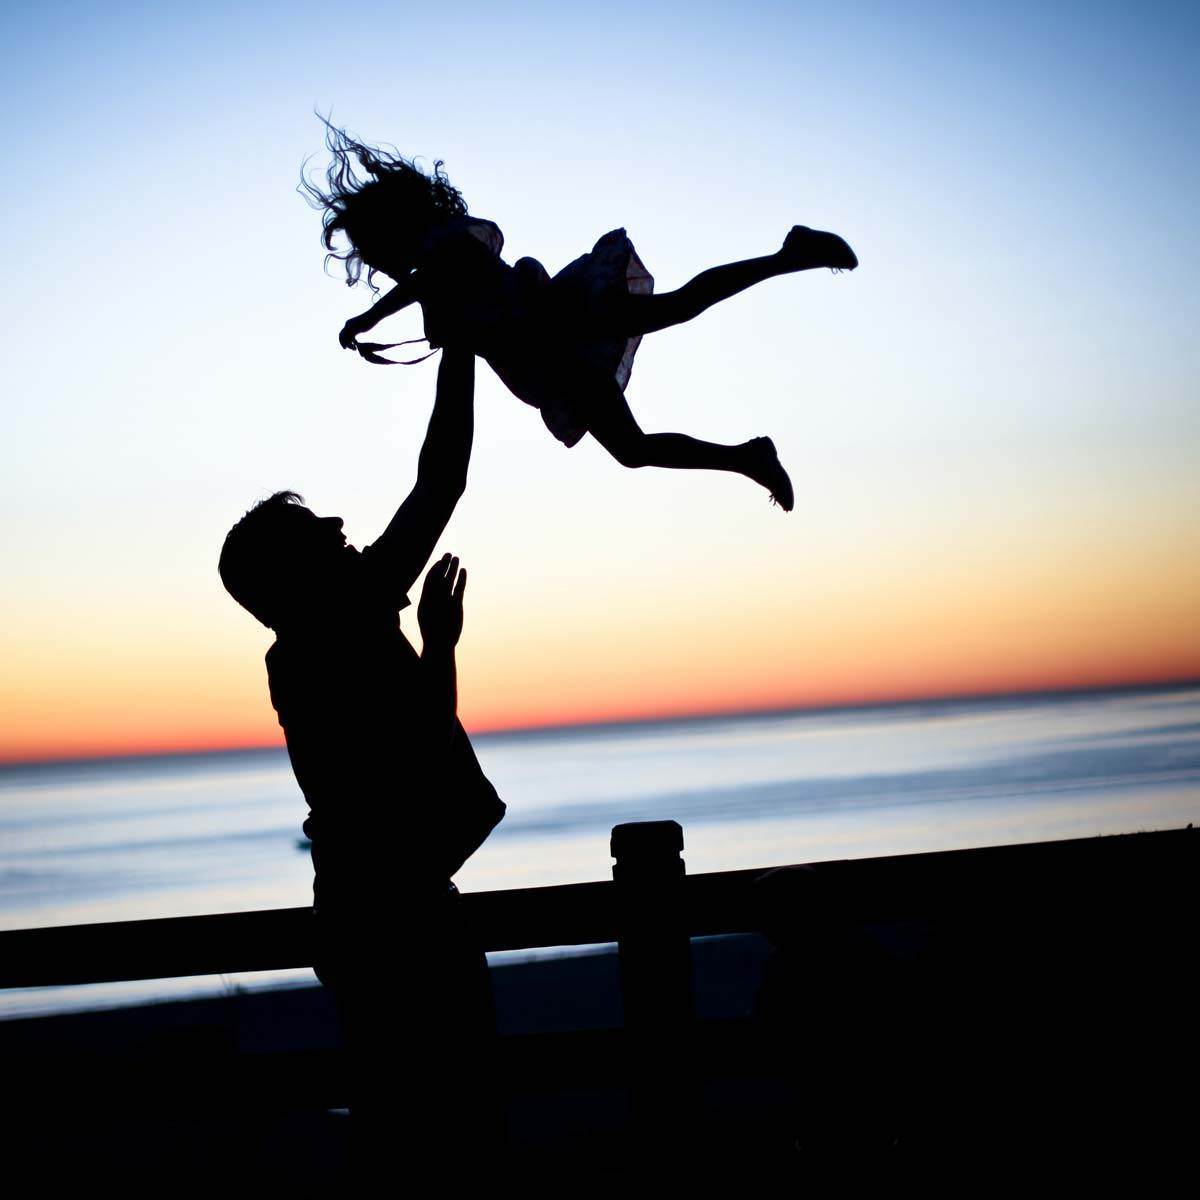 A father and child in silhouette. The child is being thrown in the air.